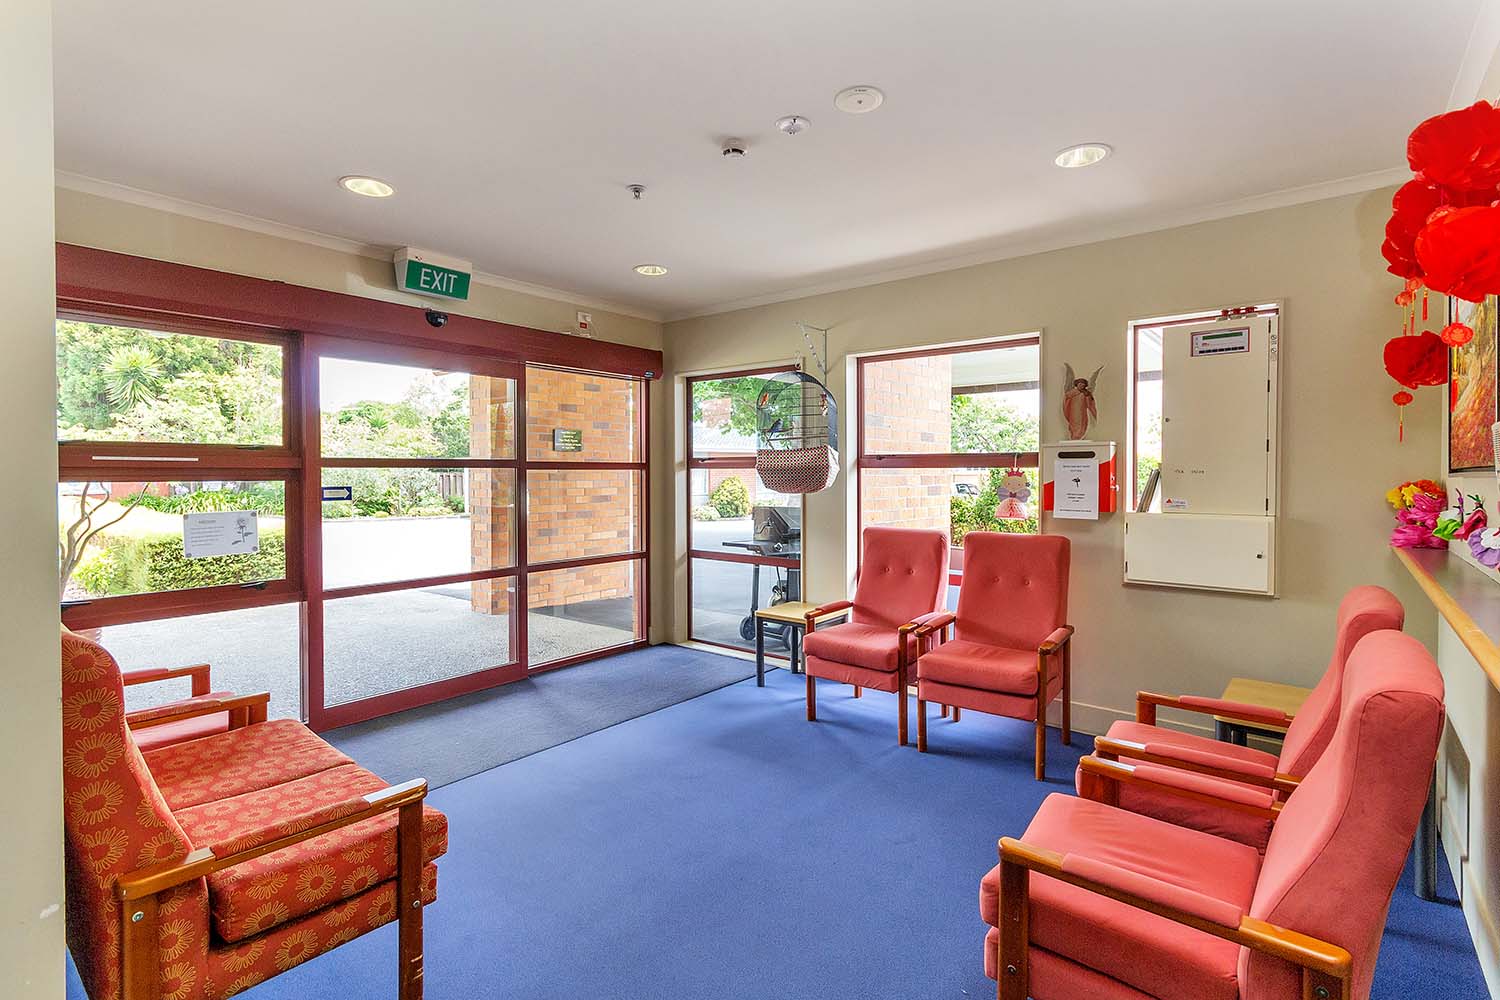 CHT Royal Oak Care Home - Day Room